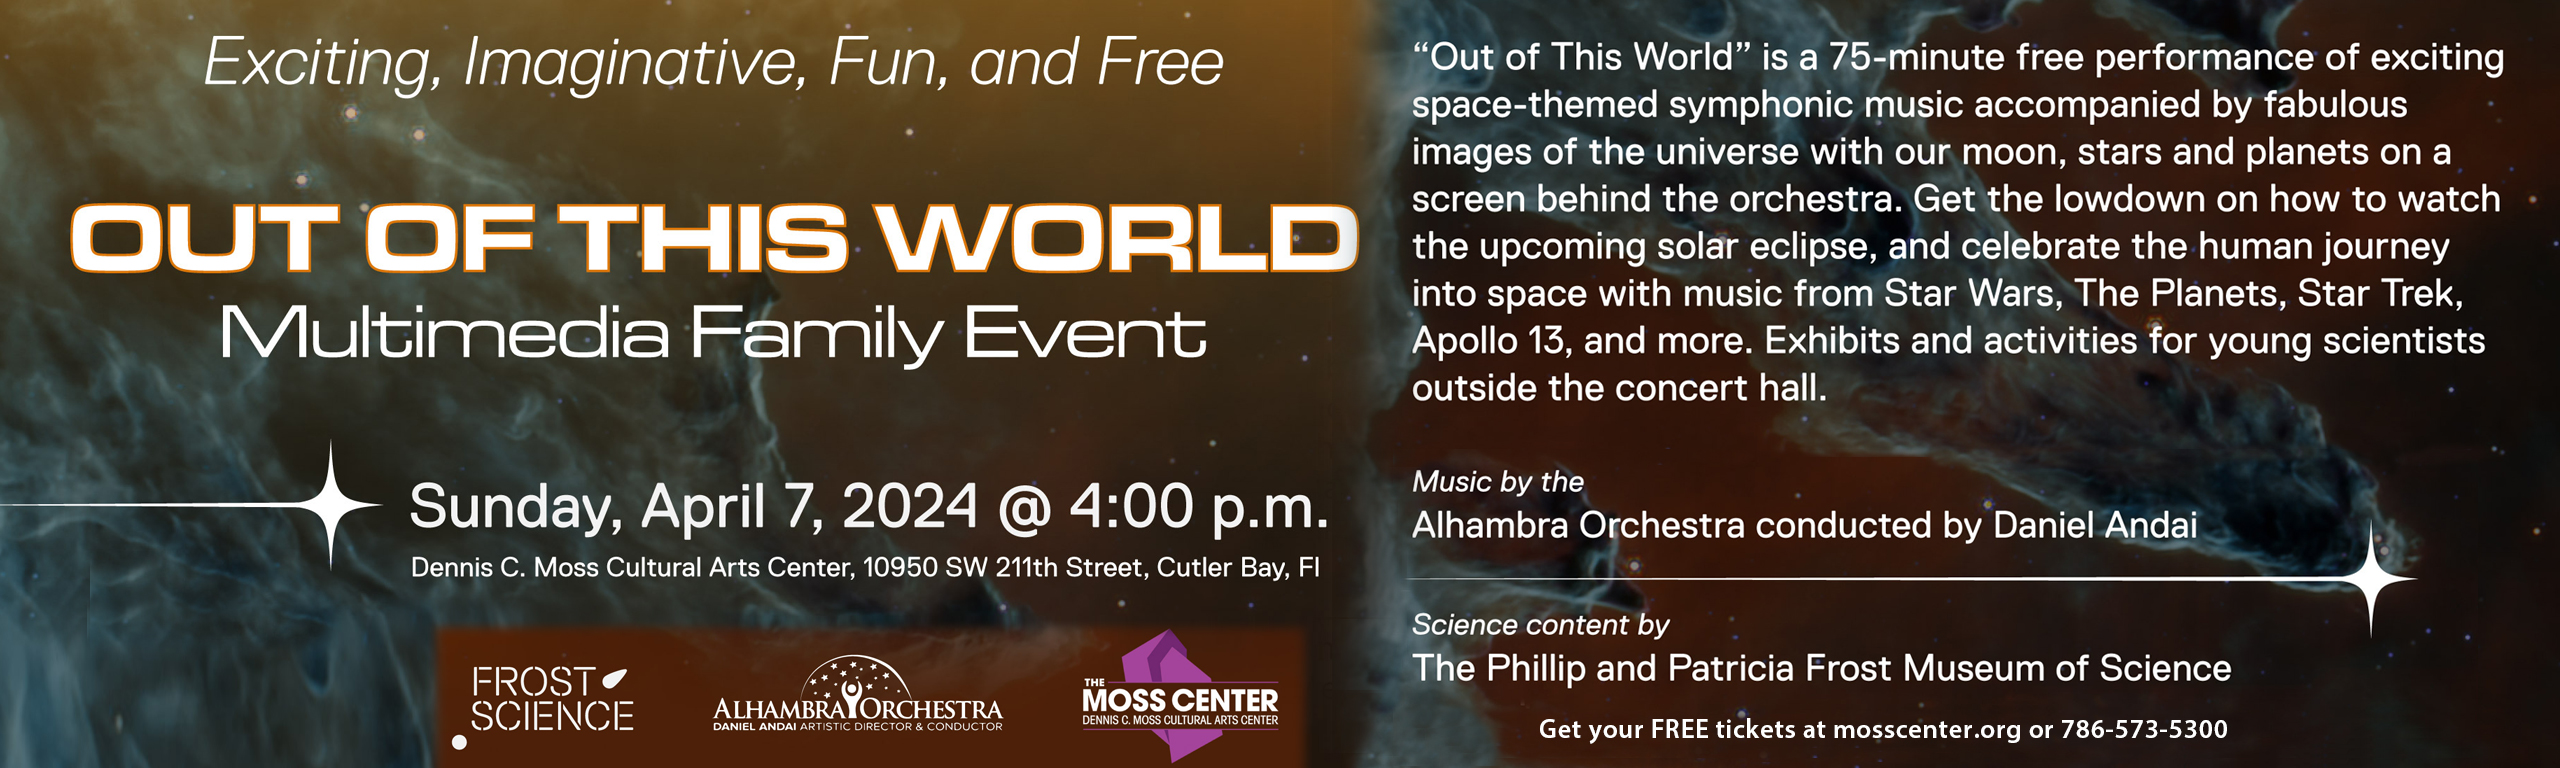 OUT OF THIS WORLD free concert